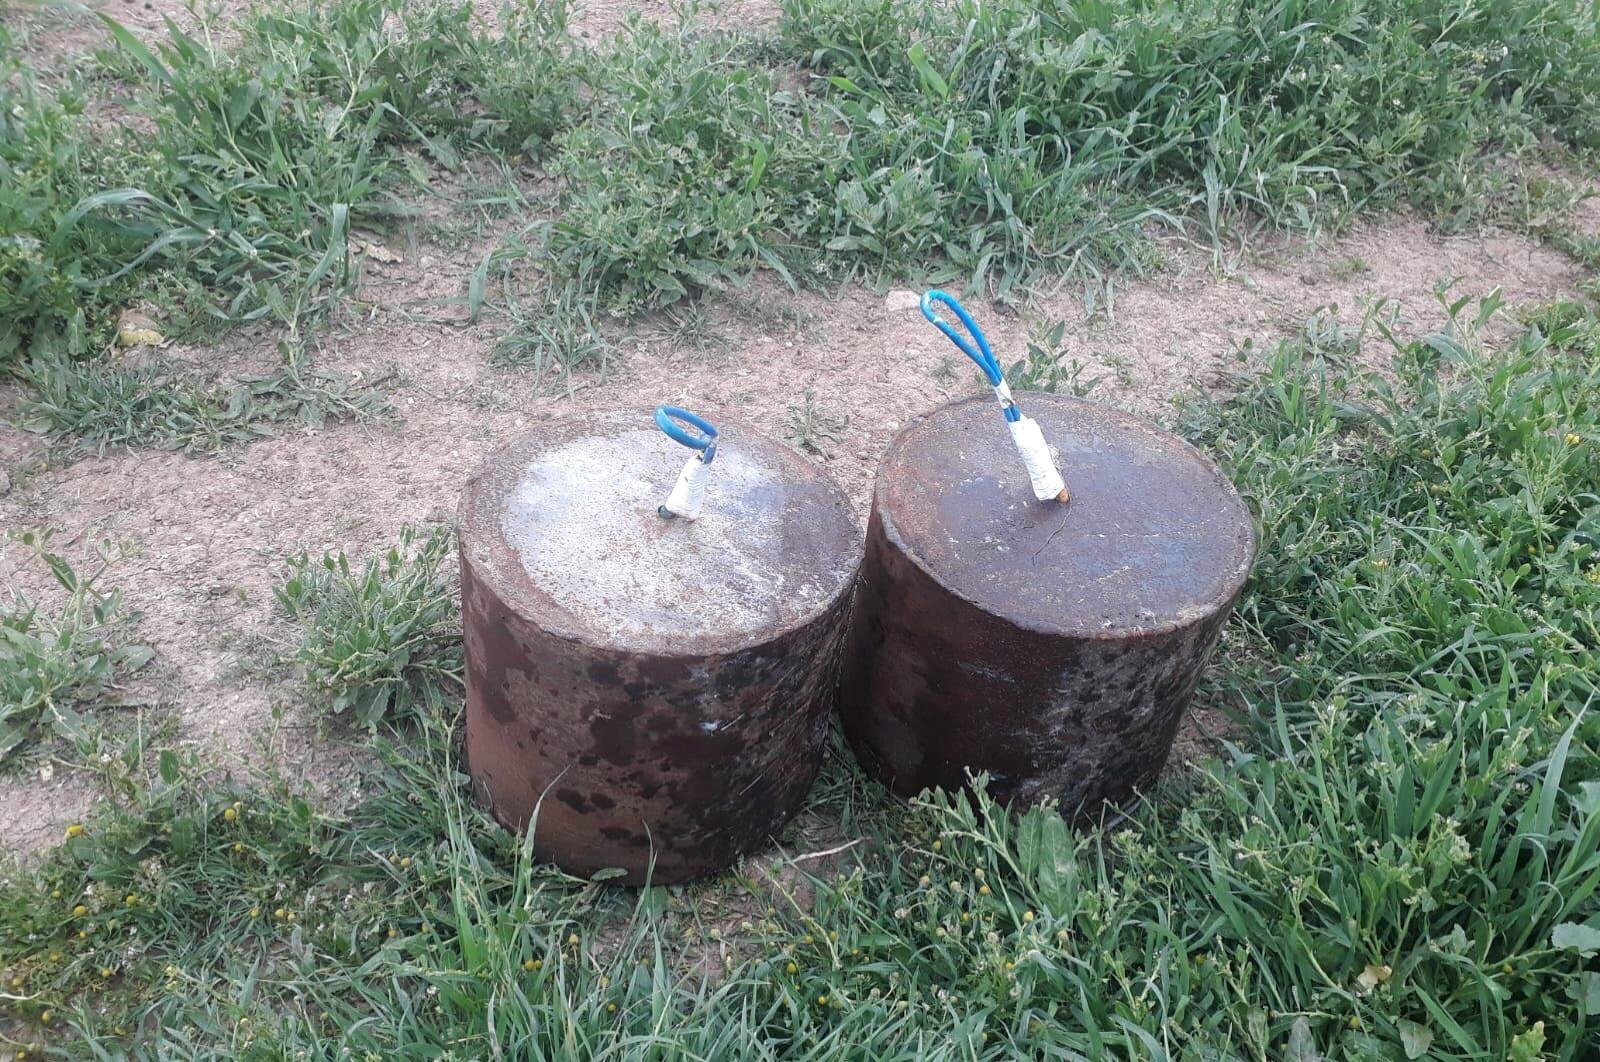 Two explosives planted by PKK, have been seized in an area falling inside Operation Peace Spring, Monday, March 30, 2020. (IHA)